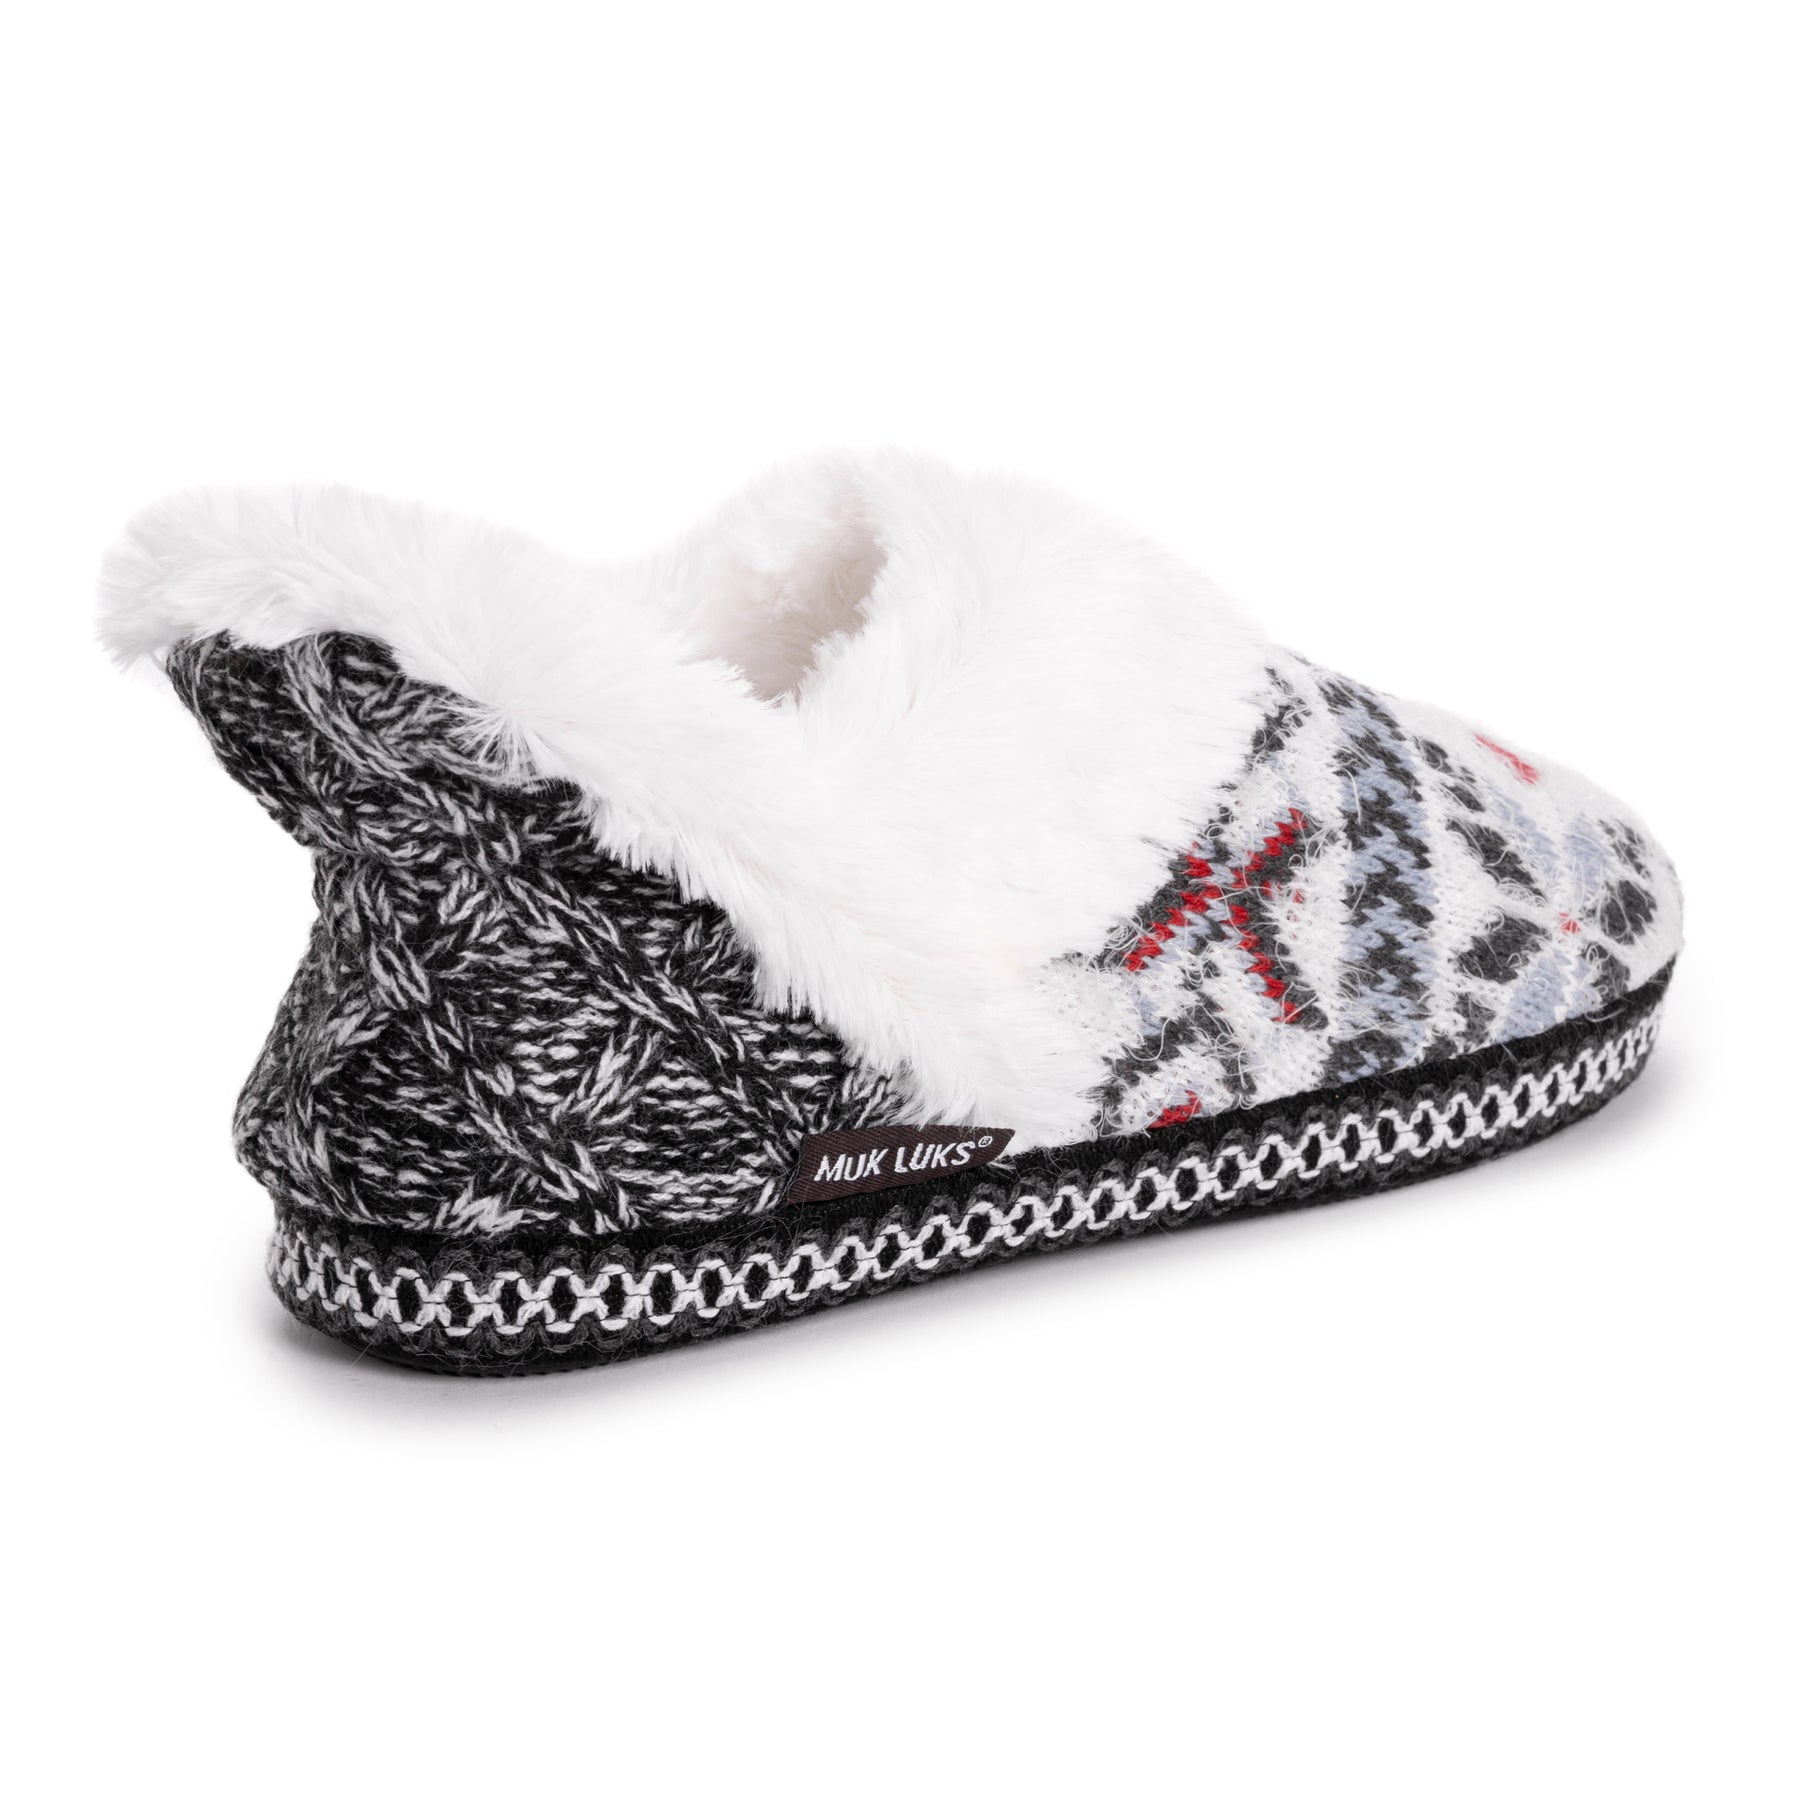 Cozy Slippers by The Original MUK LUKS